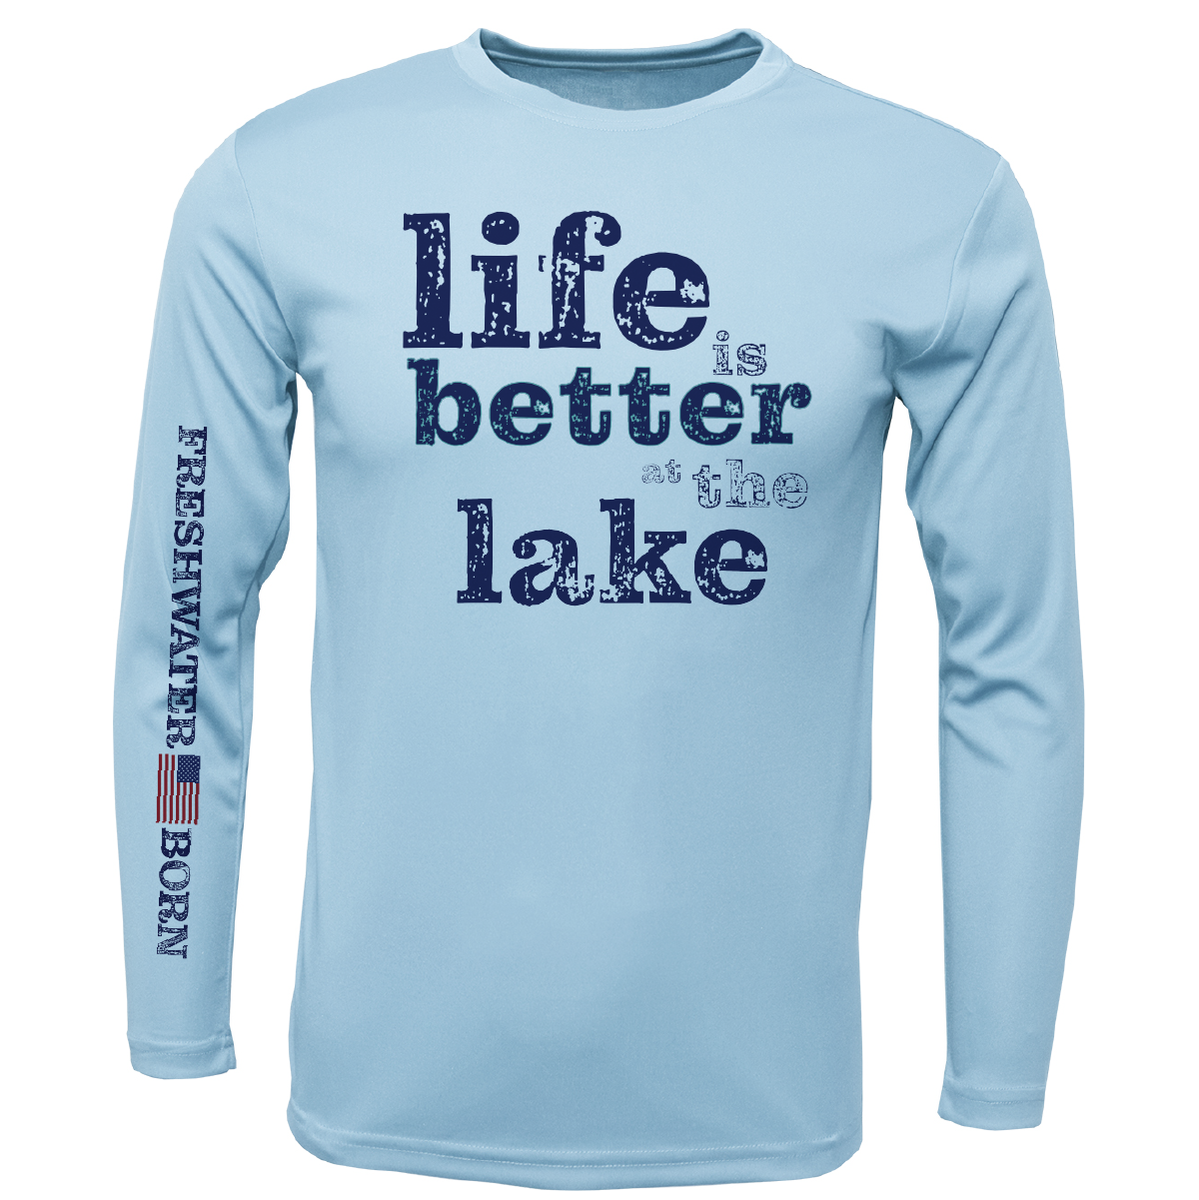 Florida Lifestyle Performance Shirt - Better Off Wet Water Lifestyle  Magazine, Charters, and Apparel